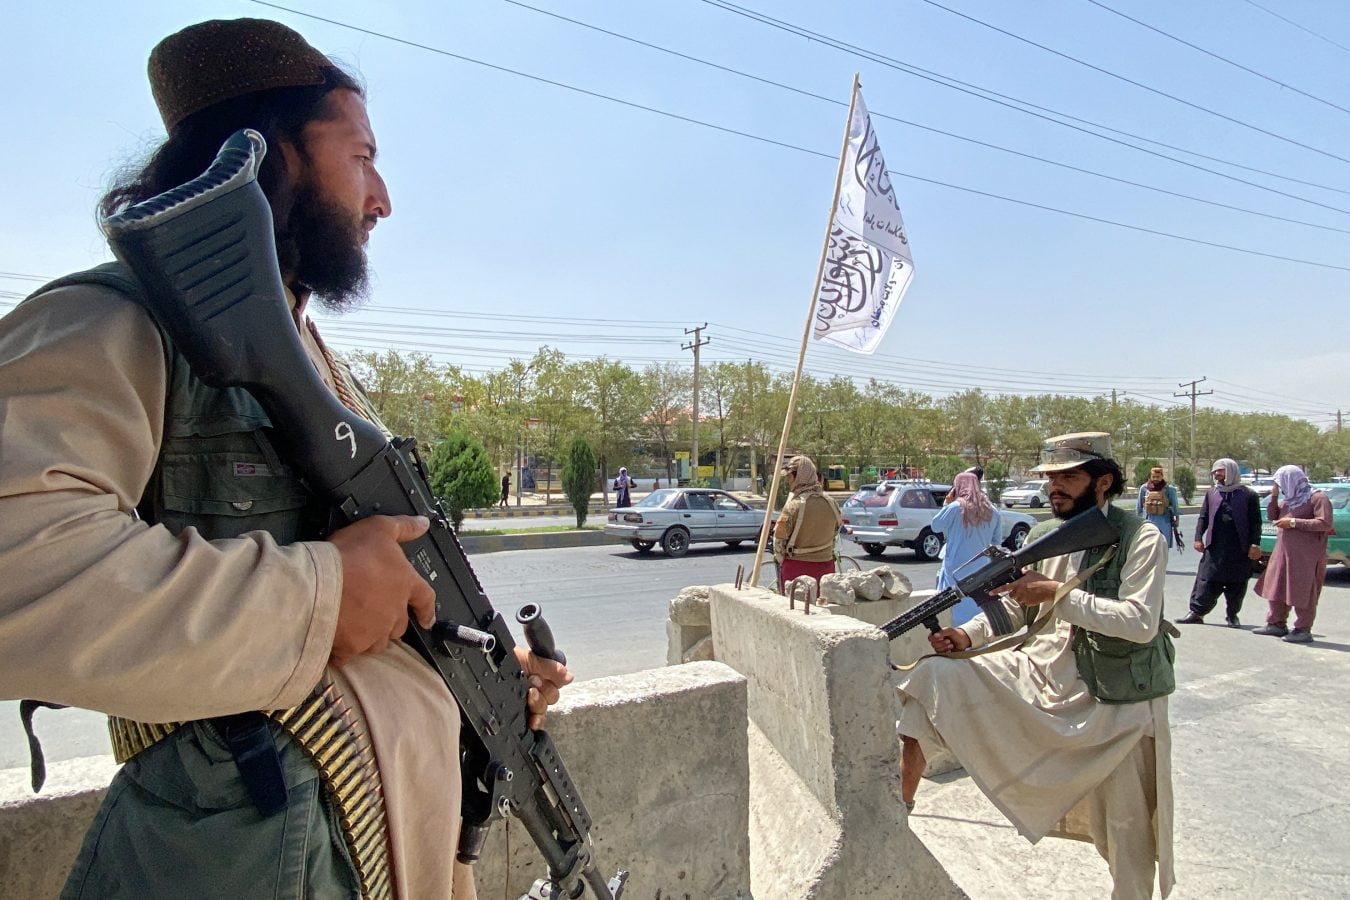 Taliban fighters stand guard at an entrance gate.